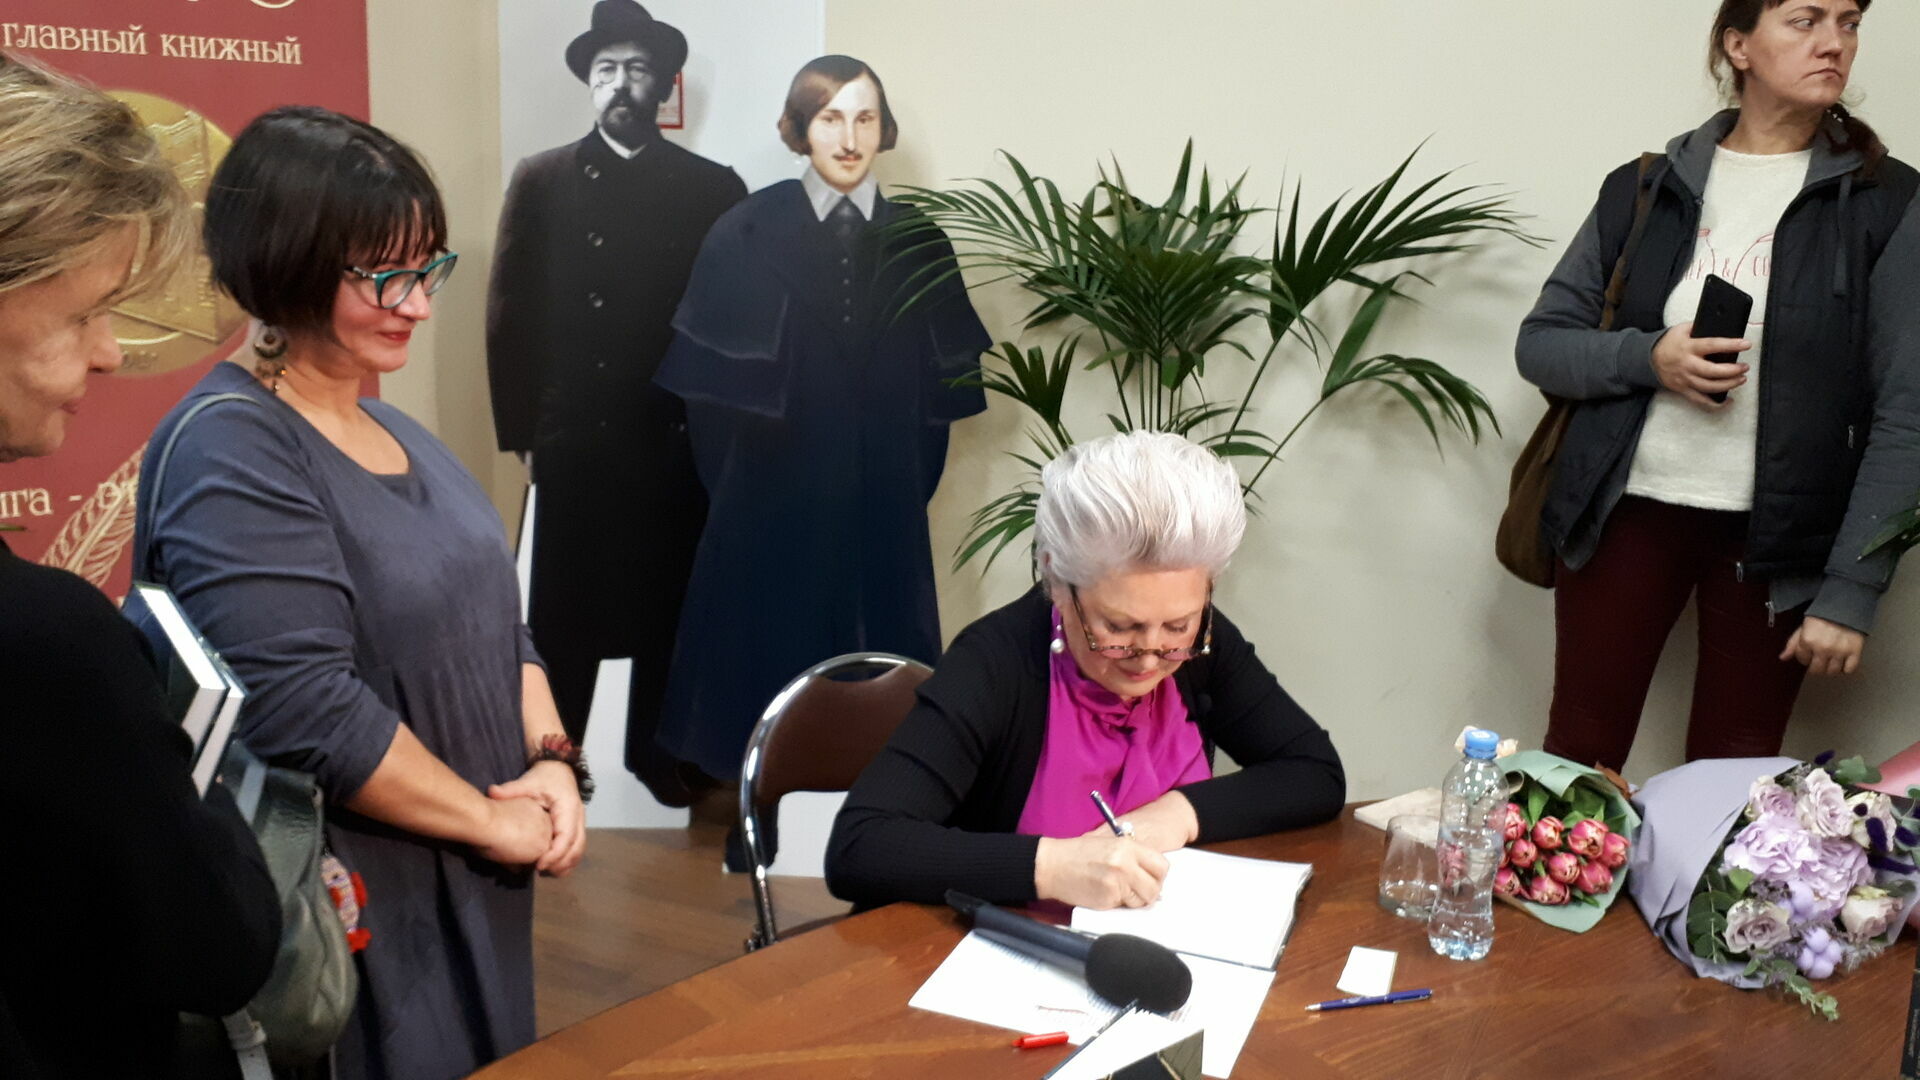 Presentation of Golubitskaya's novel "Two Writers or Keys to the Attic" took place in Moscow